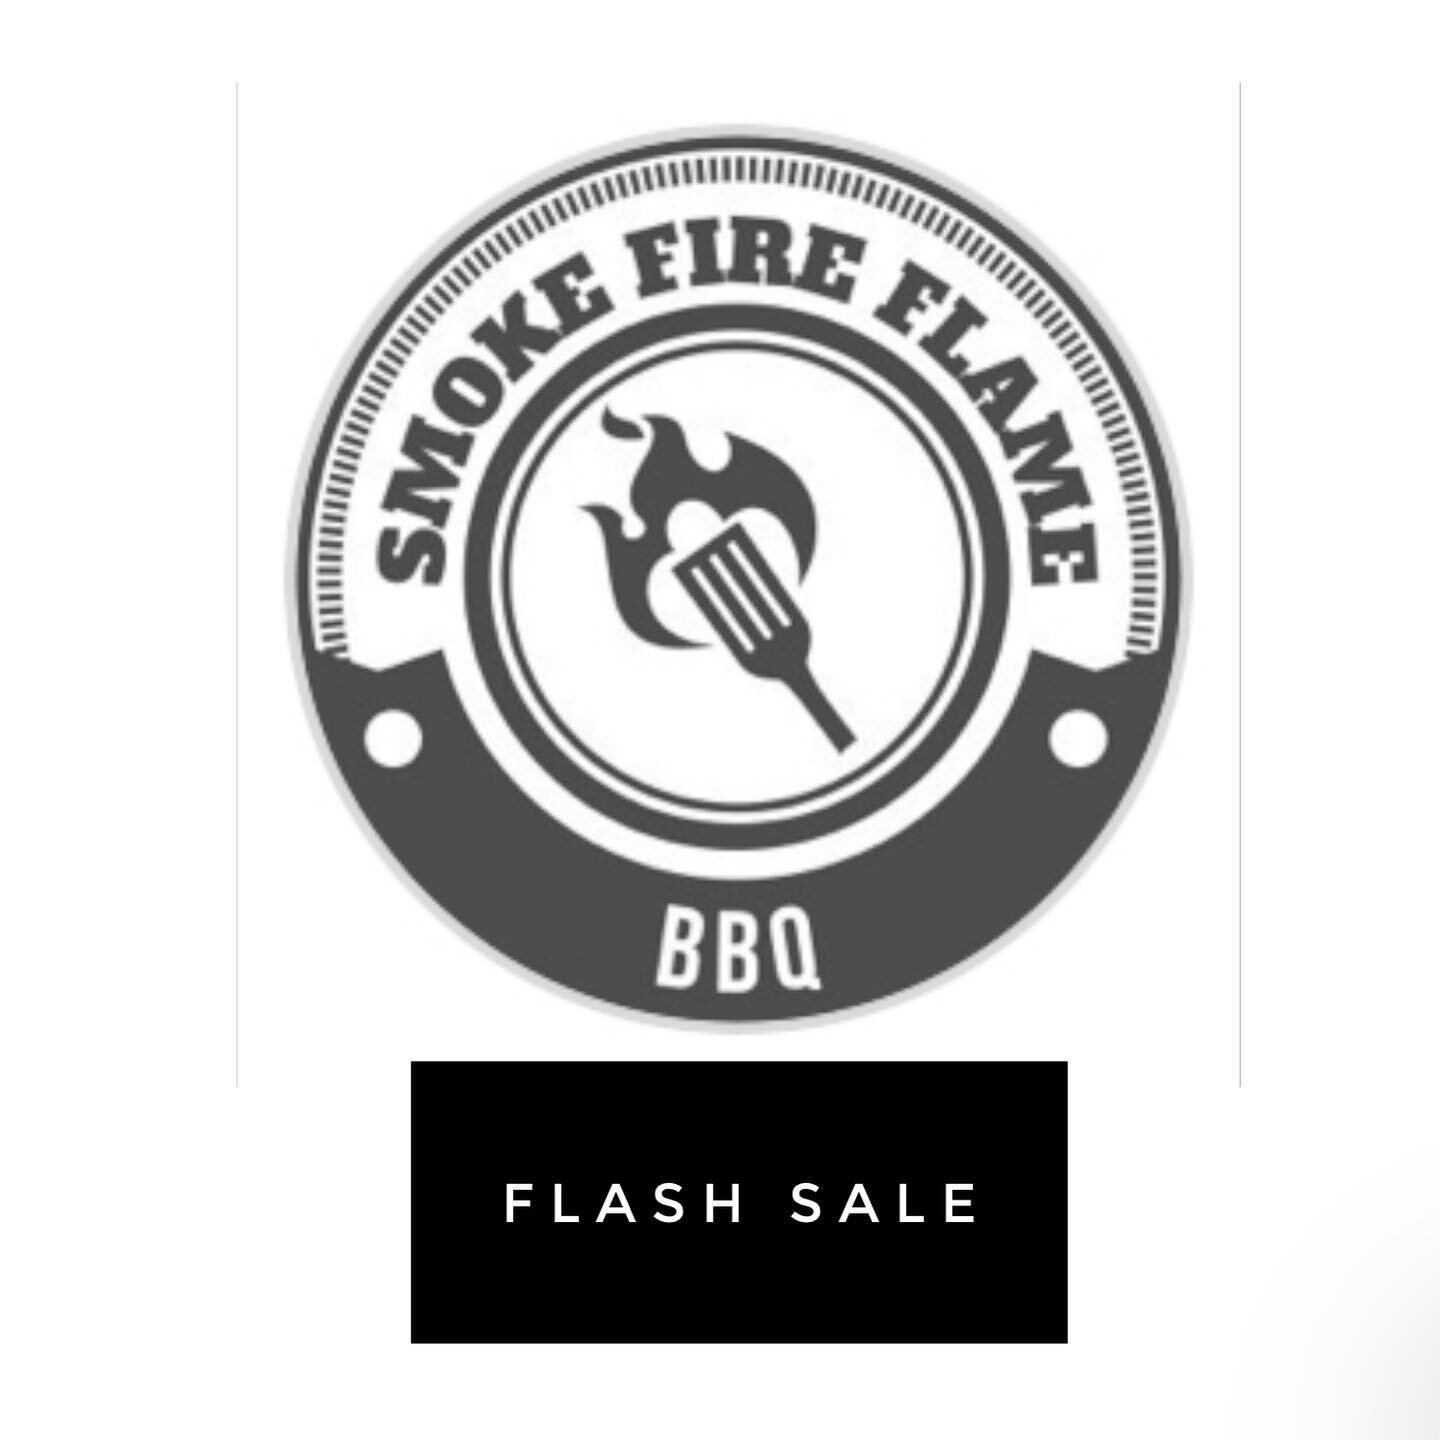 ***FLASH SALE***
***6 TICKETS LEFT***
Smoke Fire Flame x Feastable
Supper Club Collab
.
Saturday 15th April
7.00pm
.
&pound;50 for 1
&pound;90 for 2 
&pound;160 for 4
&pound;210 for 6
.
Swipe ➡️ for menus
.
DM me to book NOW!
.
@smokefireflamebbq